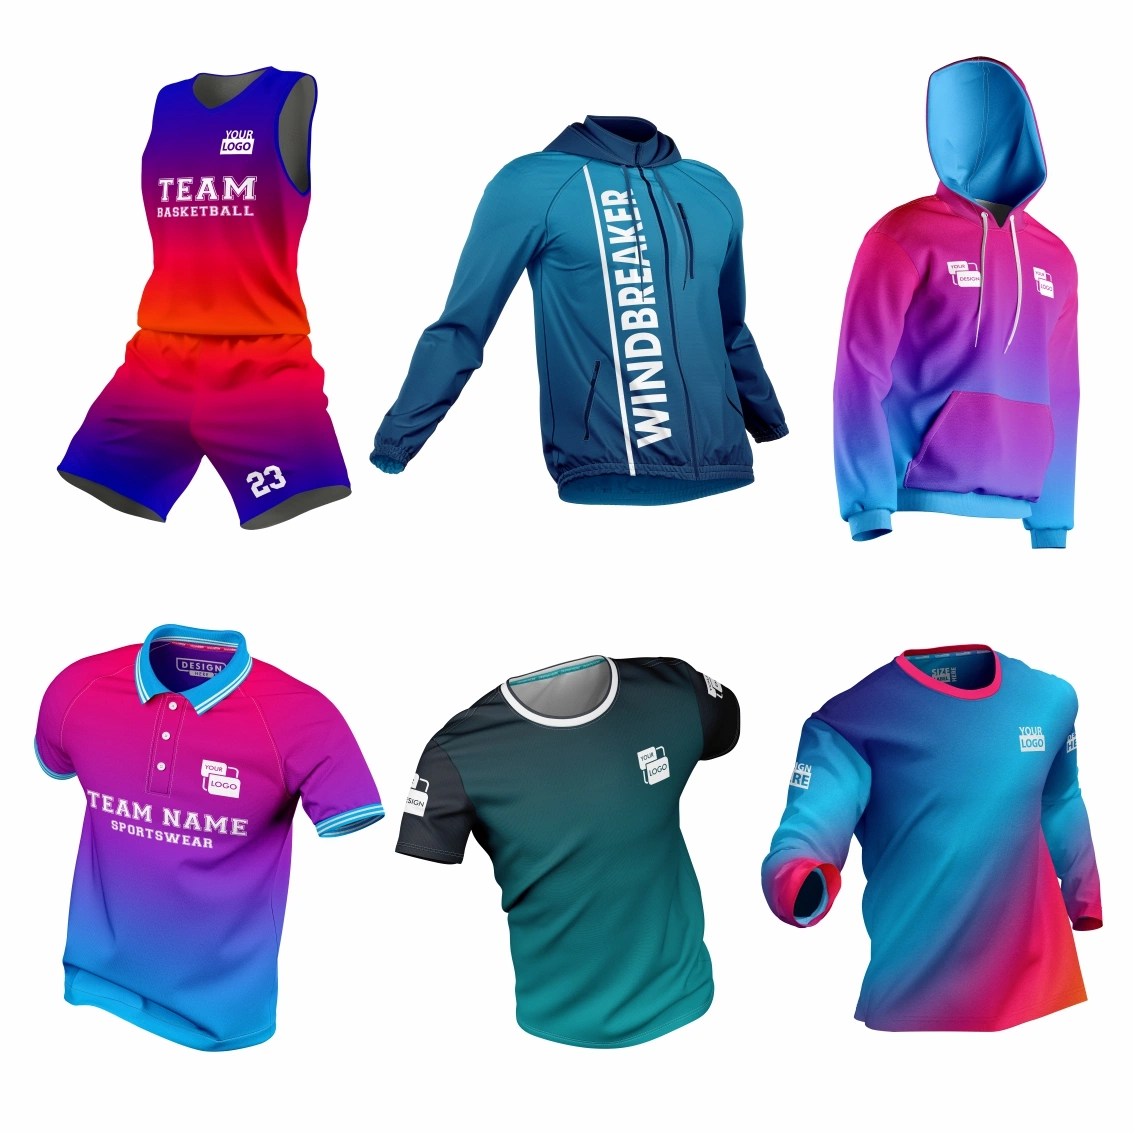 Custom Sublimation Sports Clothing for Soccer Basketball Cycling Fishing Baseball Rugby Hockey Tennis Jogging Football Yoga Gym Beach Outdoor Quick Dry Clothing